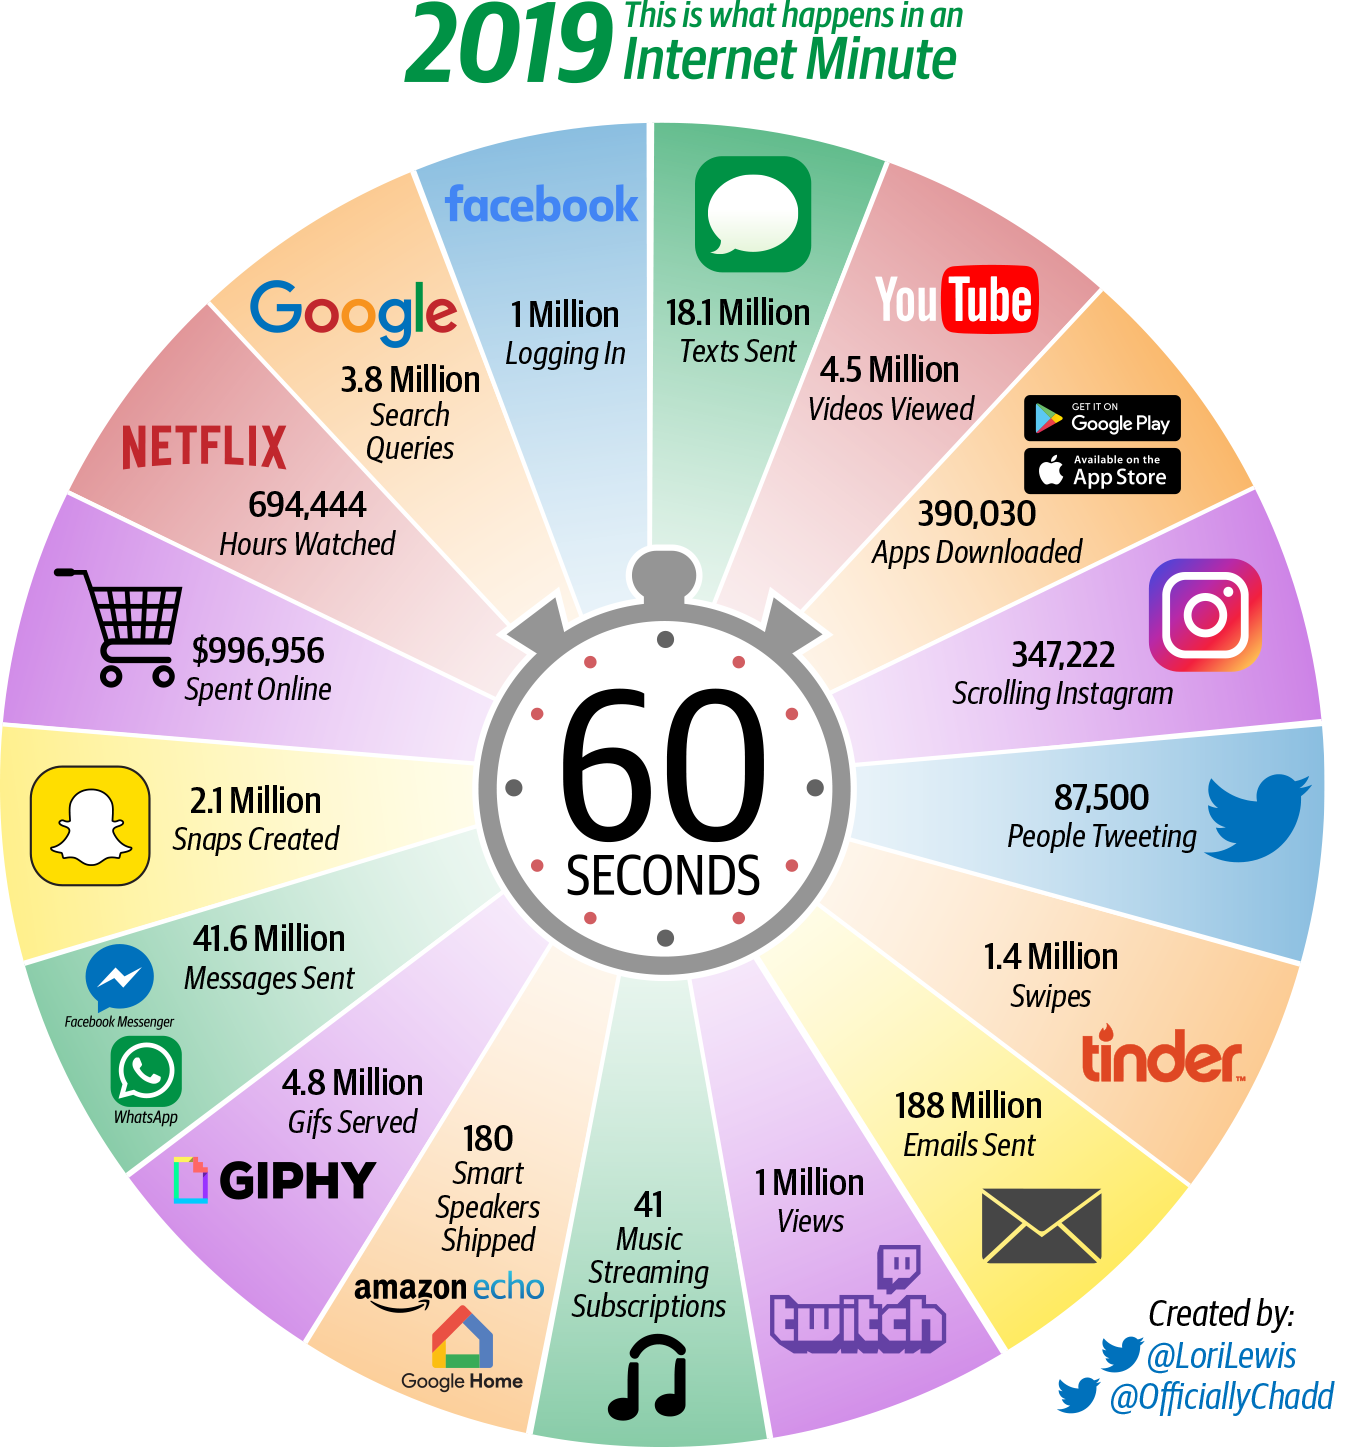 Data generated in one minute on various social platforms